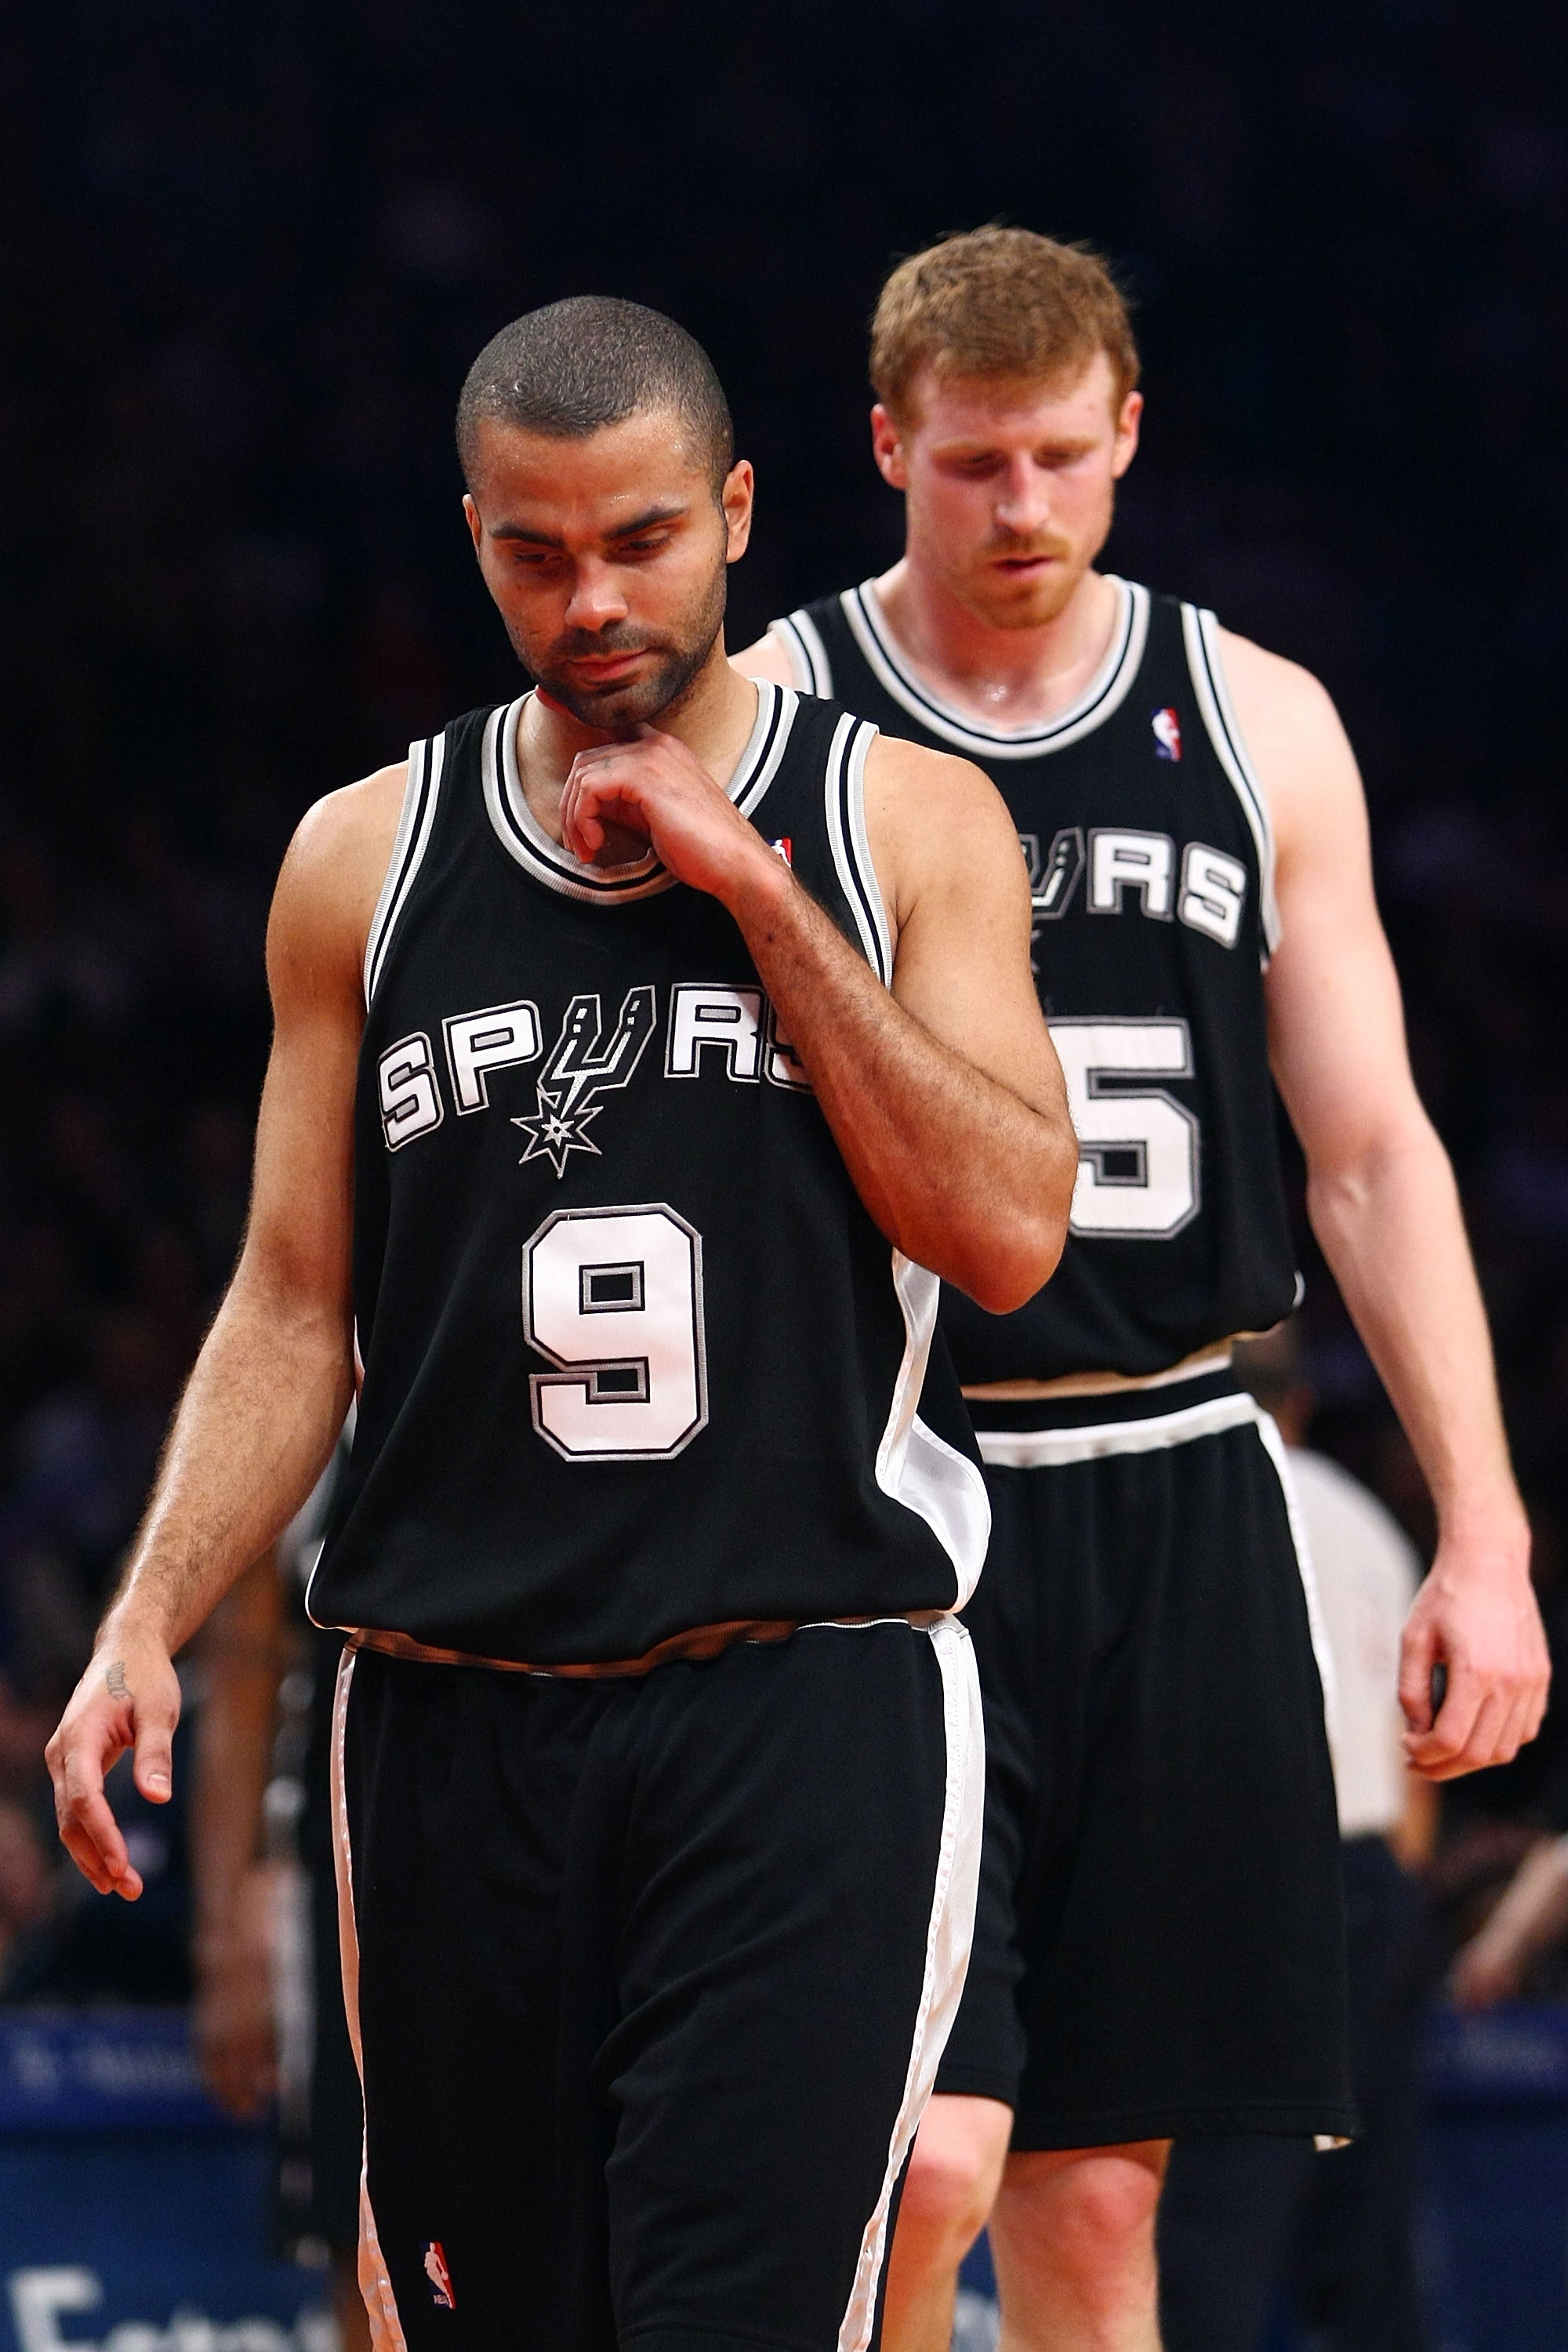 NEW YORK - FEBRUARY 17:  Tony Parker #9 and Matt Bonner #15 of the San Antonio Spurs walk up the court against the New York Knicks at Madison Square Garden February 17, 2009 in New York City. NOTE TO USER: User expressly acknowledges and agrees that, by d